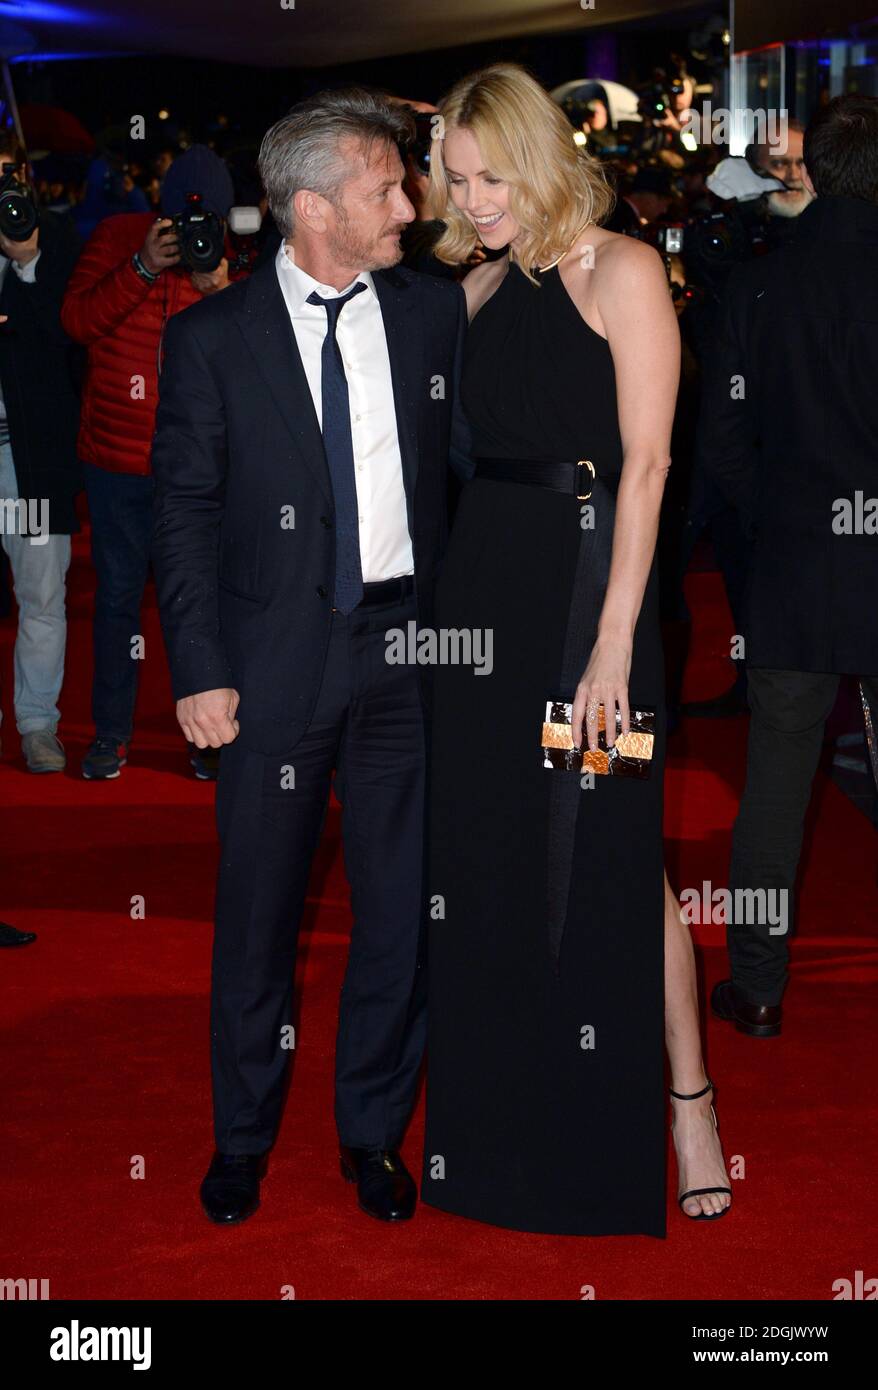 Sean Penn and Charlize Theron attending The Gunman UK film premiere held at the BFI Southbank, London. Stock Photo